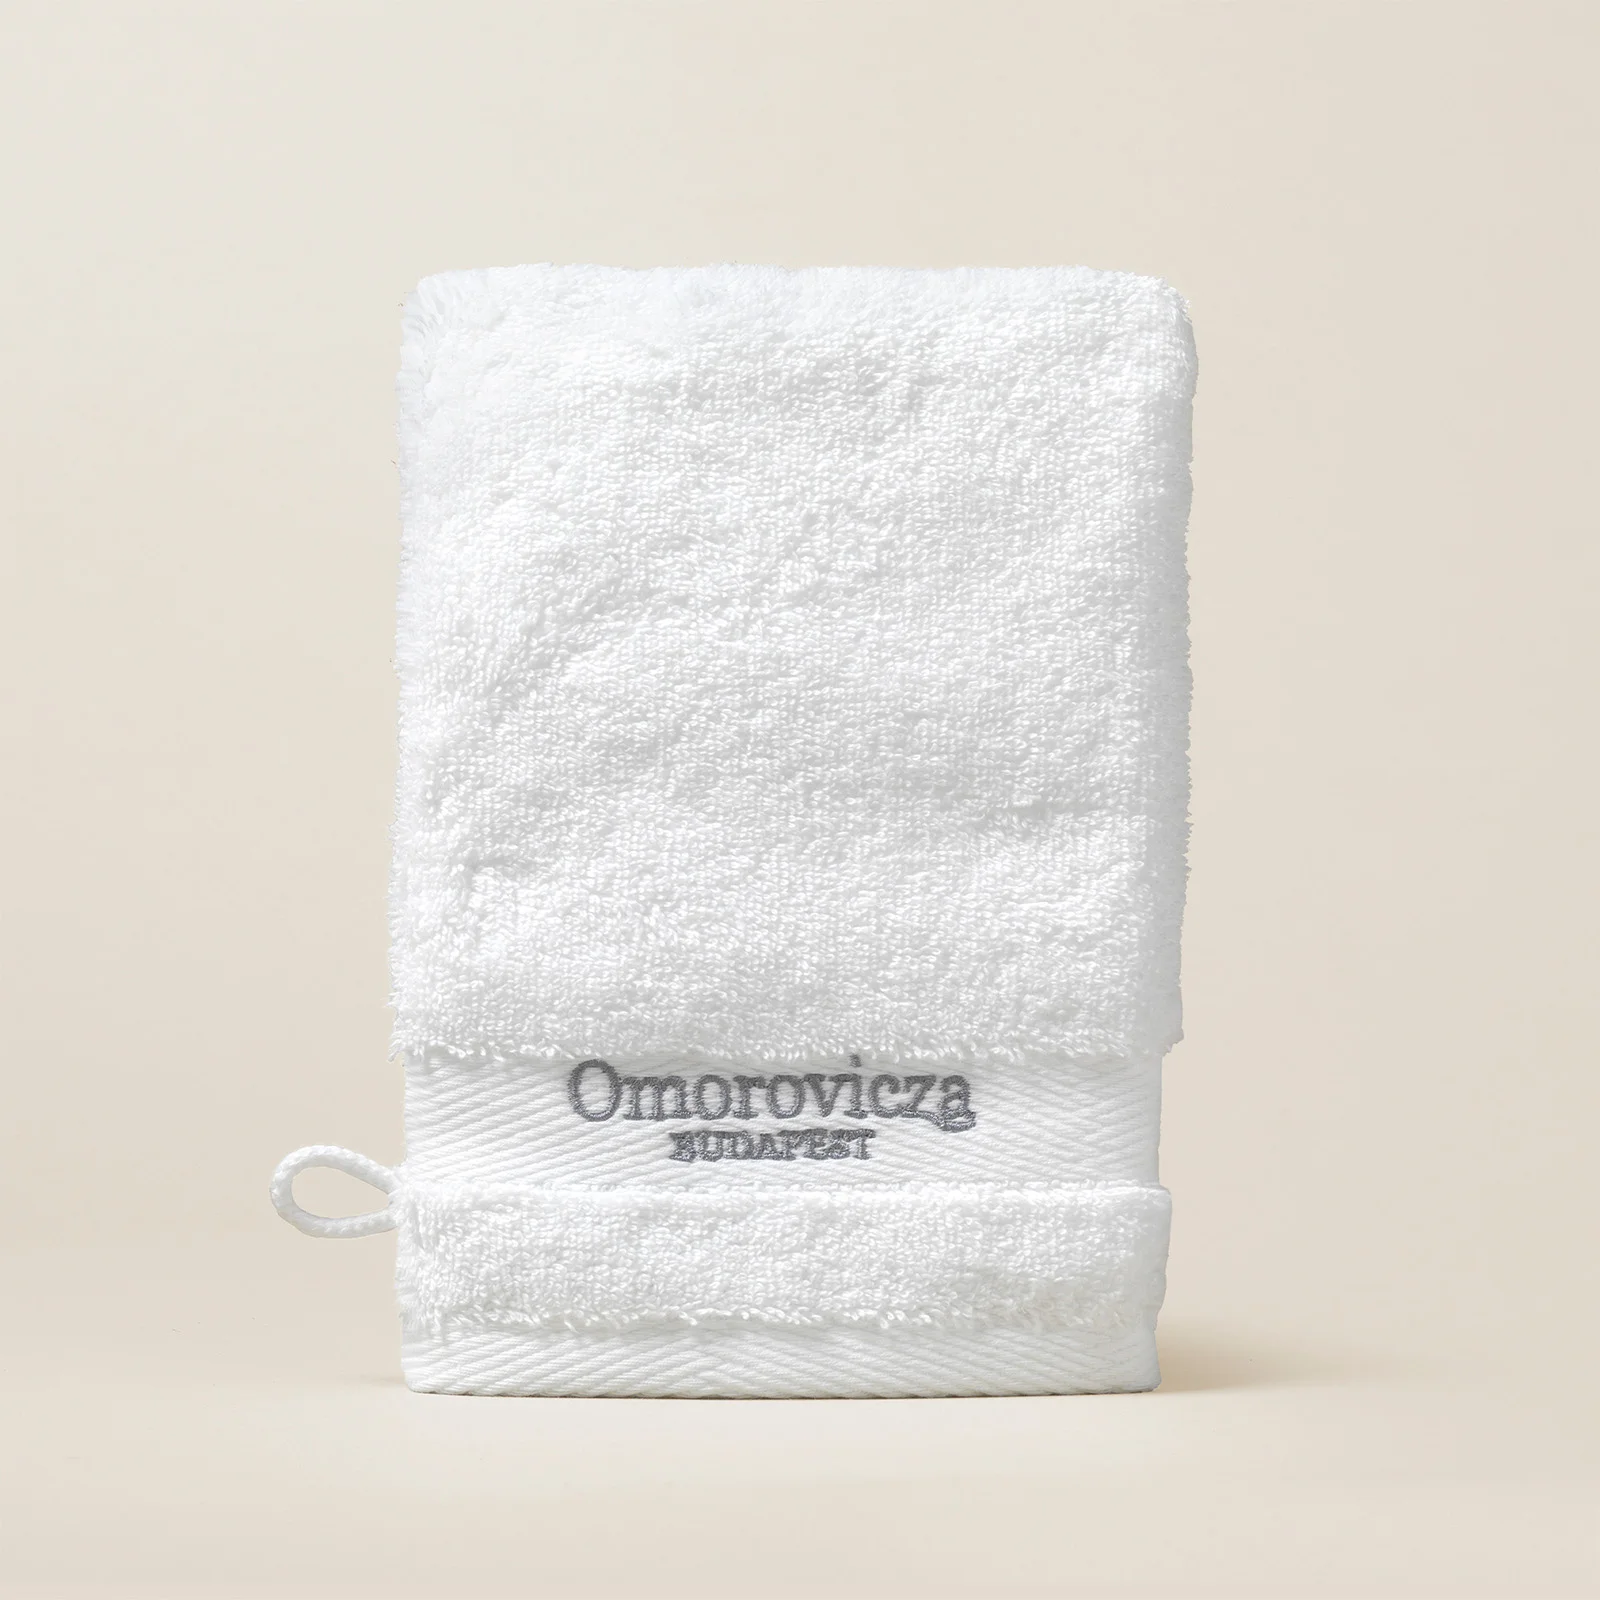 Omorovicza Cleansing Mitt In Pouch Image 1